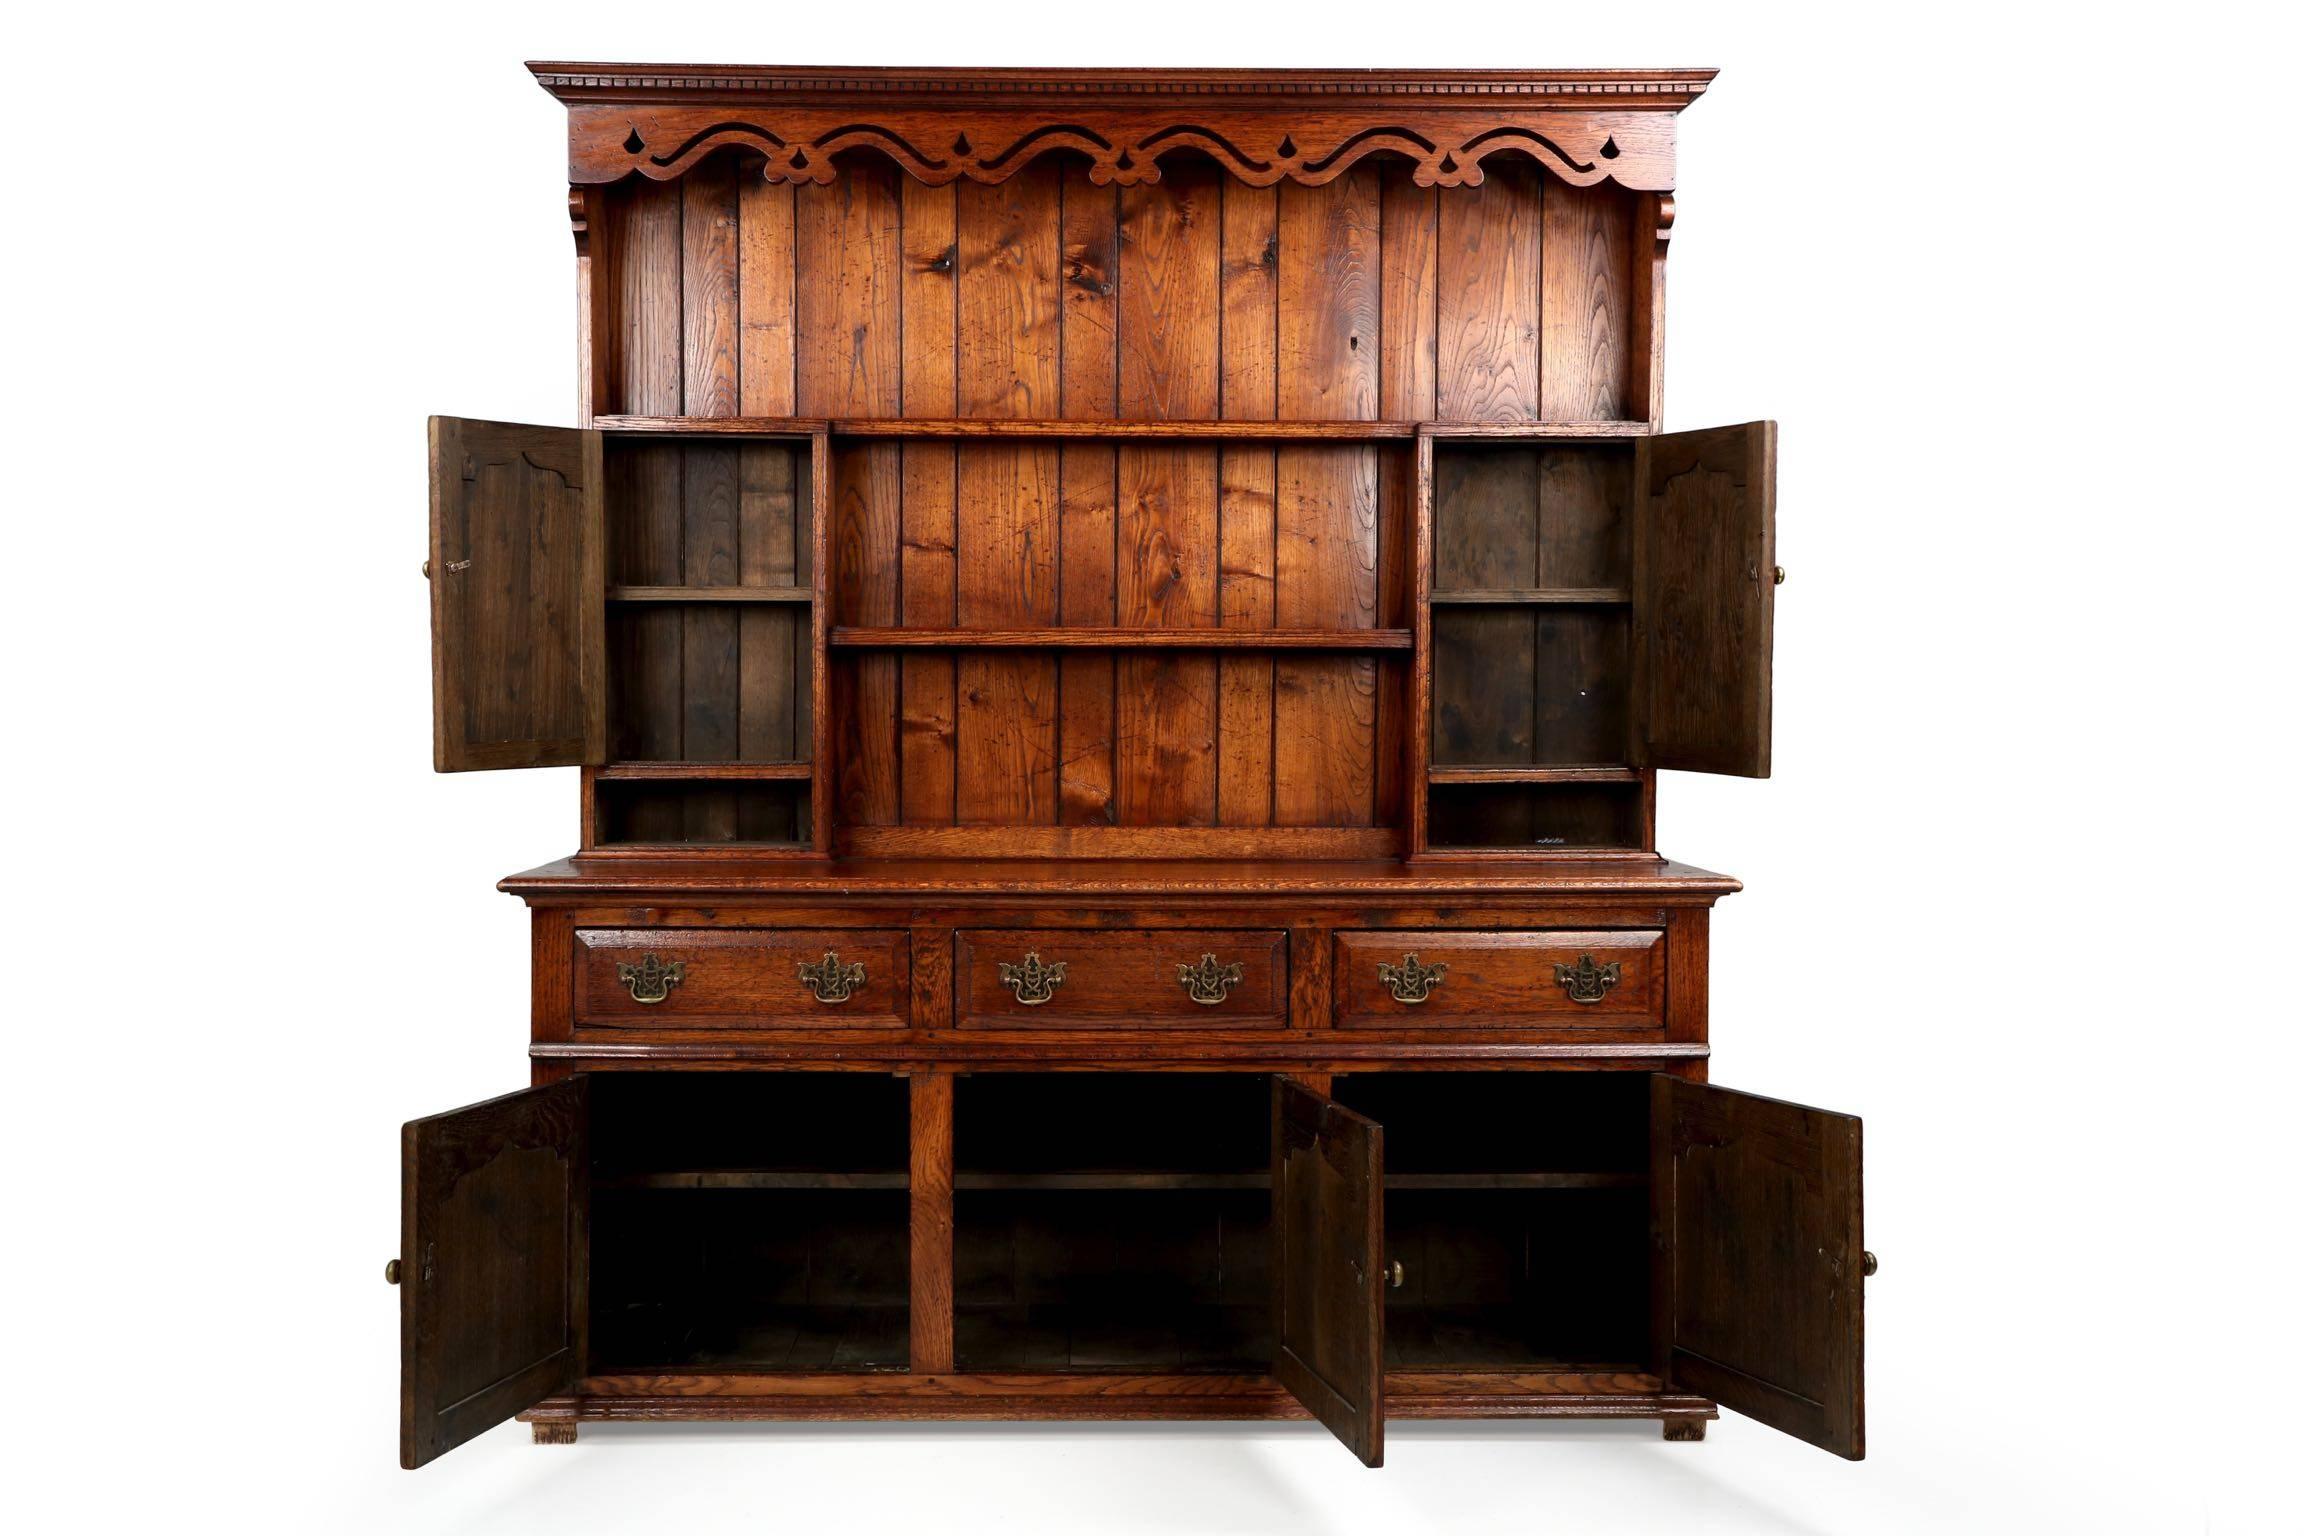 A finely hand crafted piece, this English Welsh Cupboard was entirely bench made during the first quarter of the 20th Century. There is a well developed patina to the oak oak, being silky to the touch from years of waxing and gentle wear; the